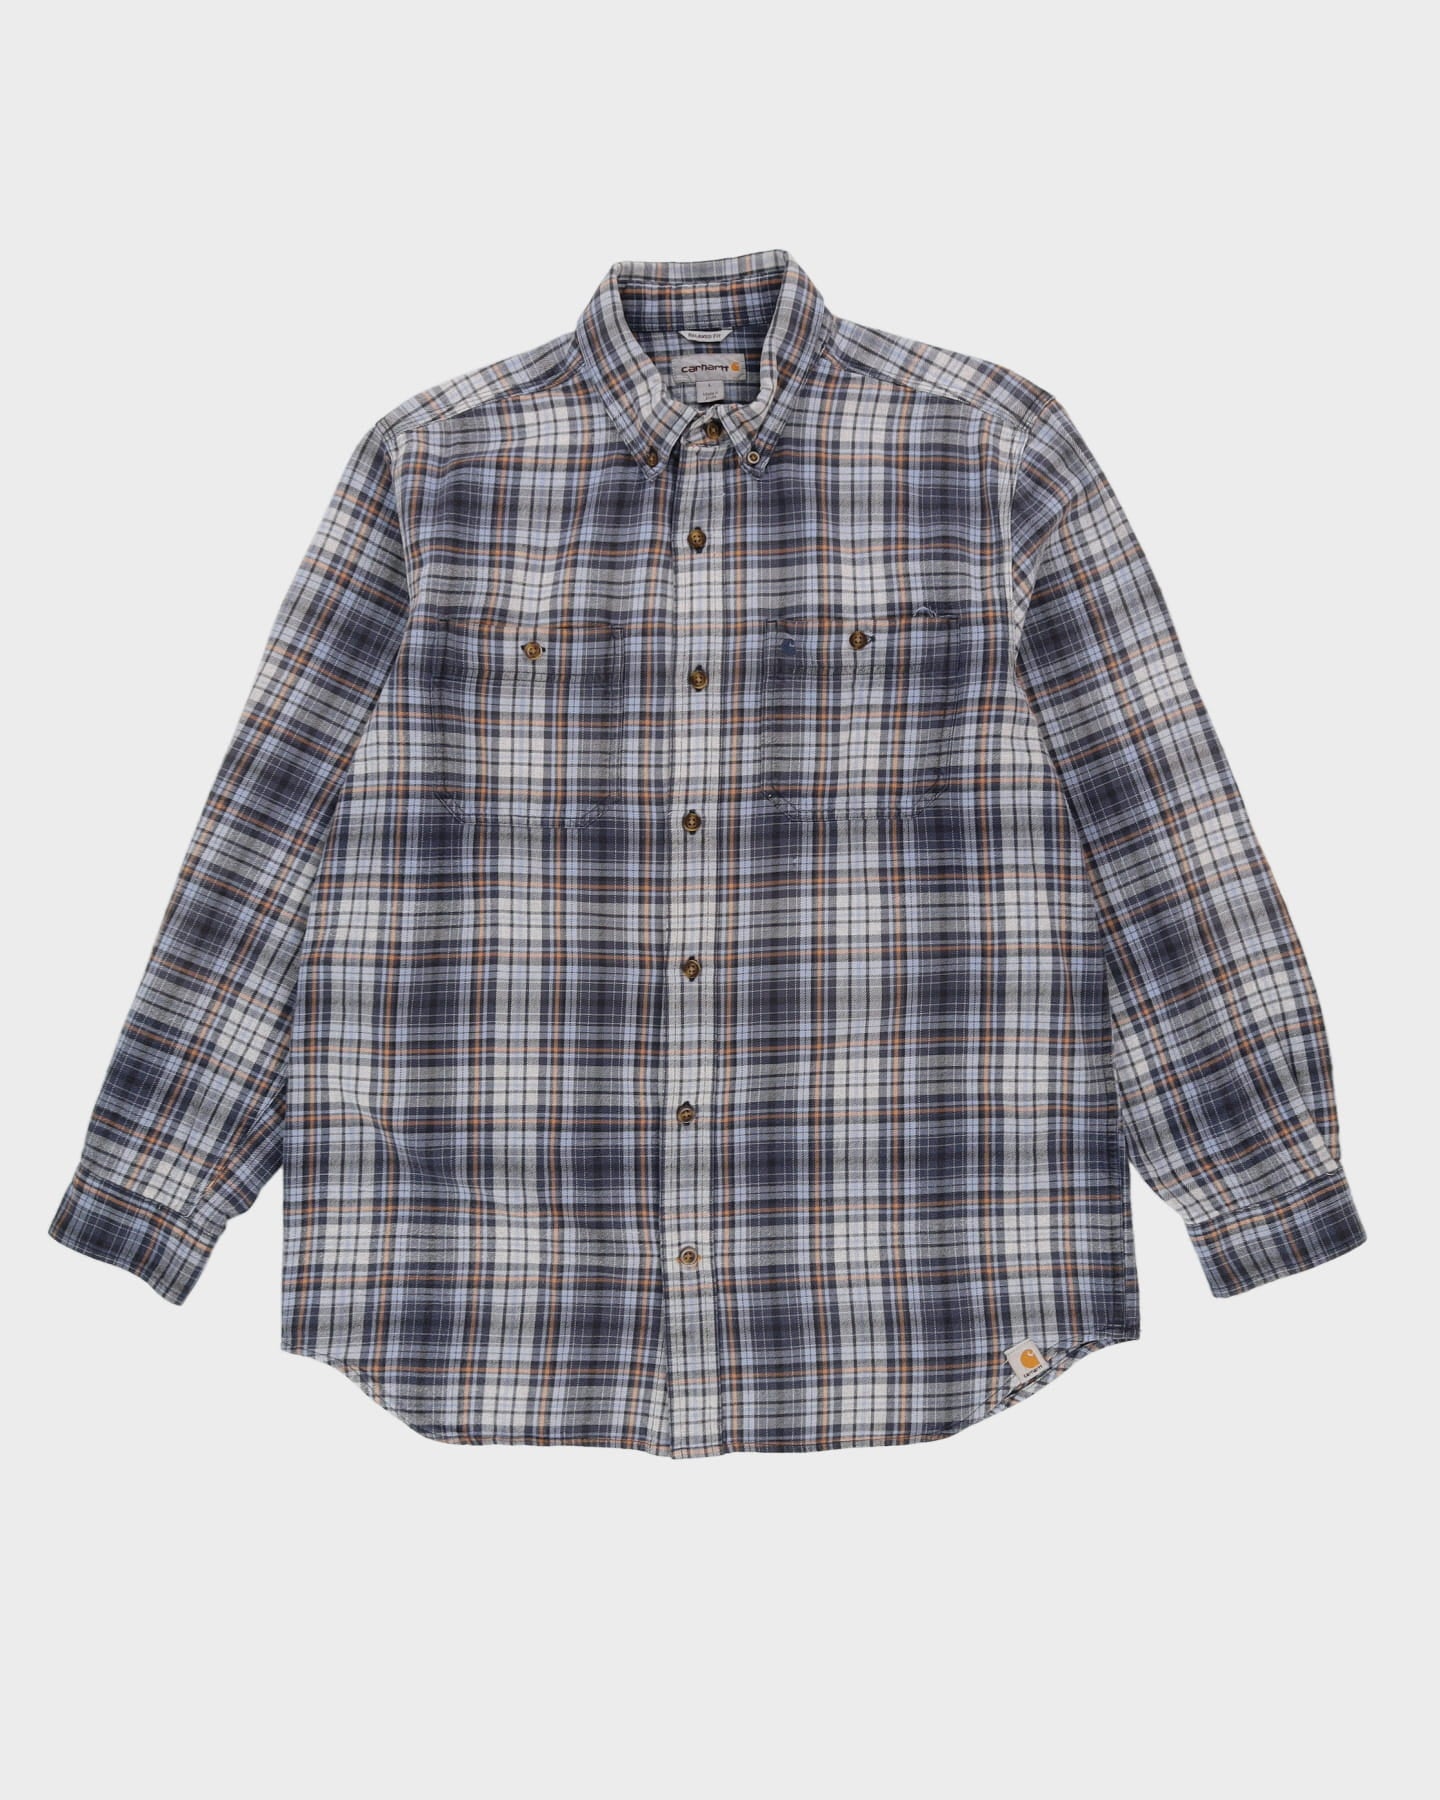 Carhartt Blue Check Patterned Western Flannel Shirt - L